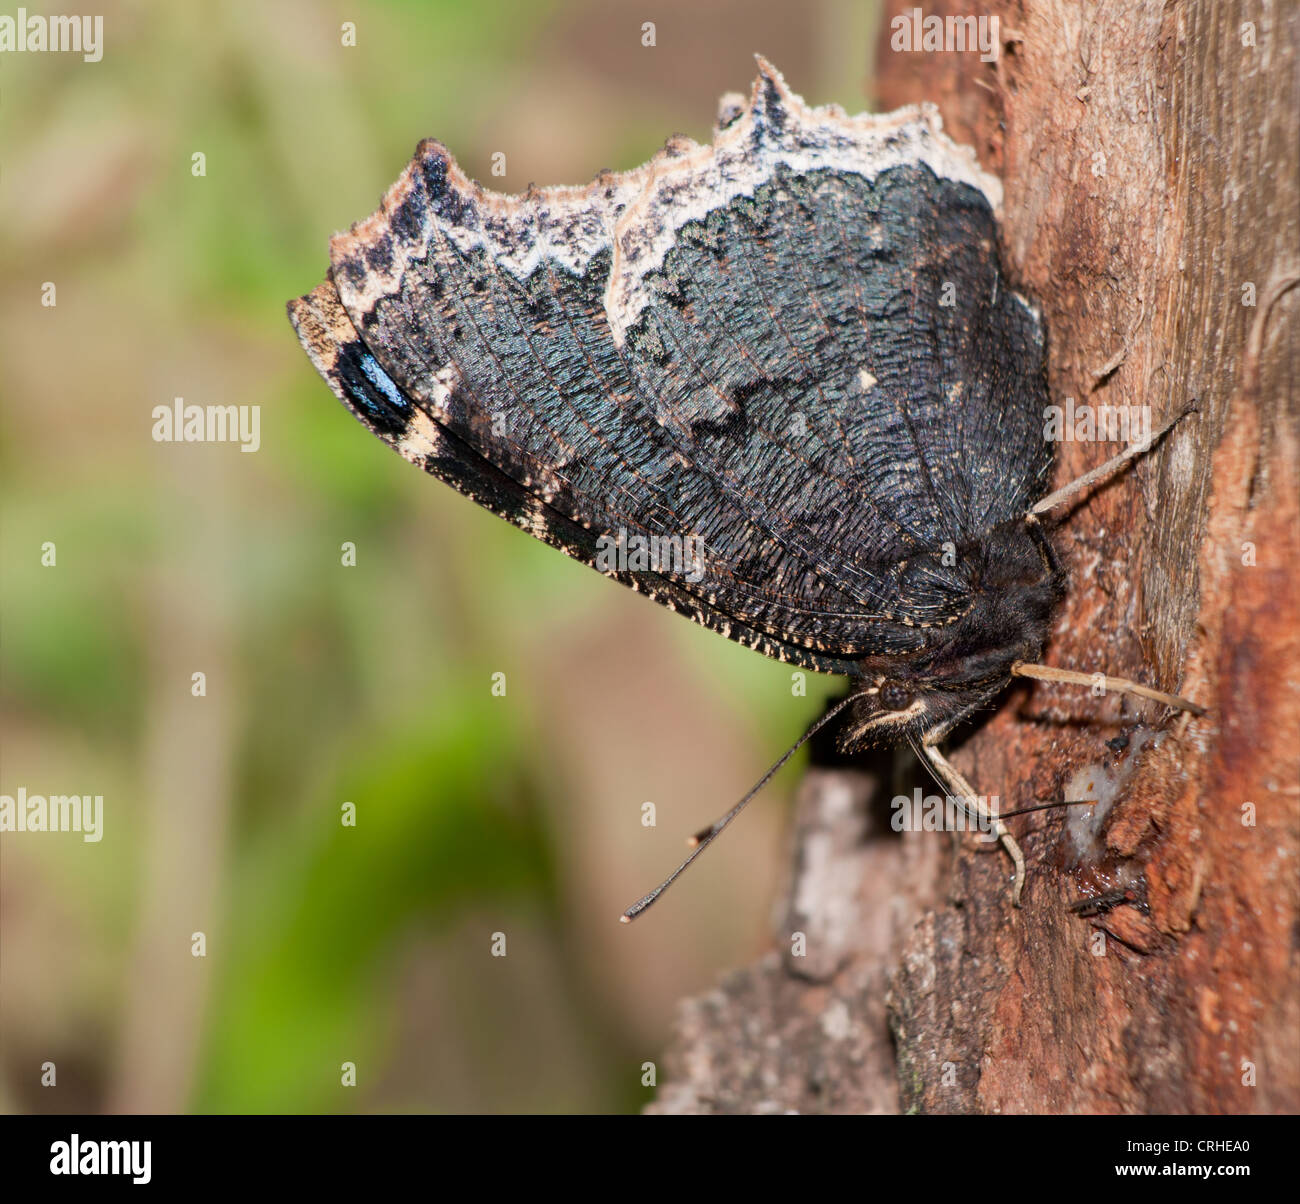 Ventral view of Mourning Cloak, Nymphalis antiopa butterfly, feeding on tree sap Stock Photo